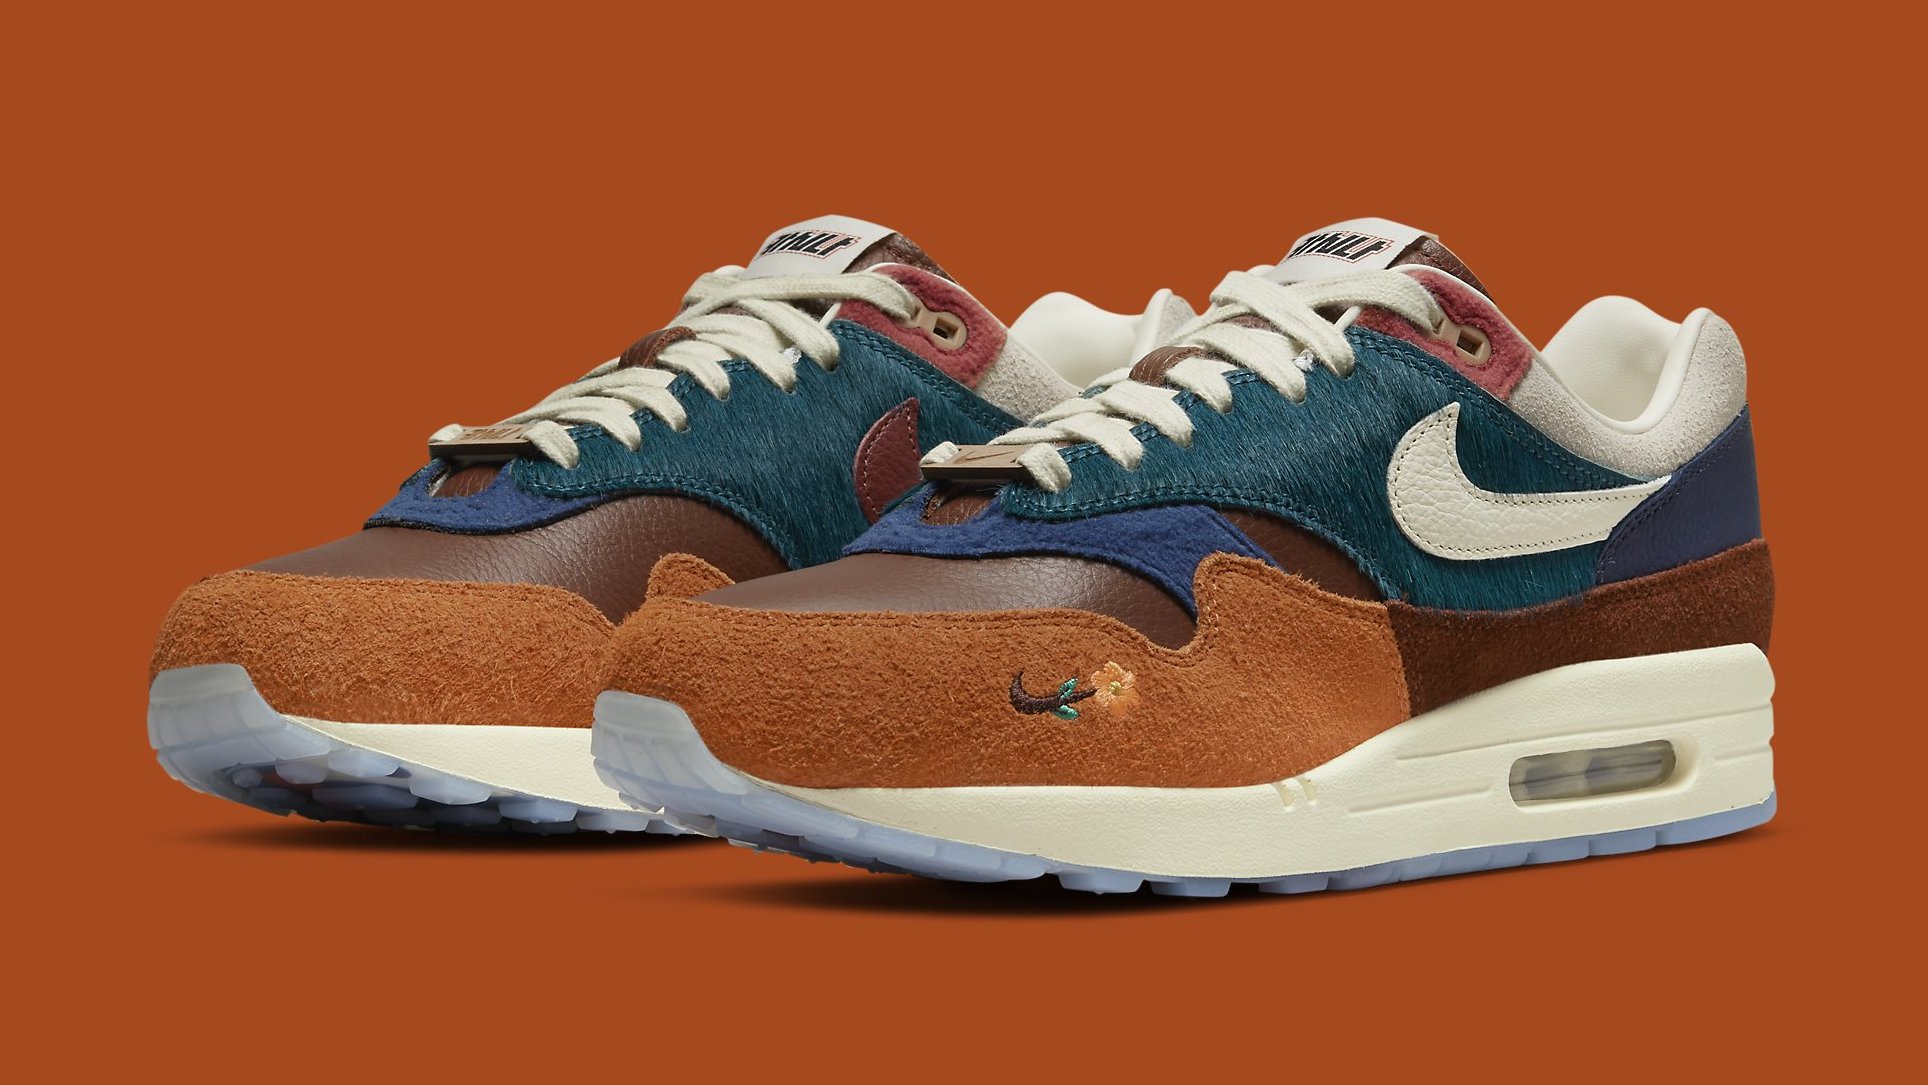 when did nike air max 1 come out